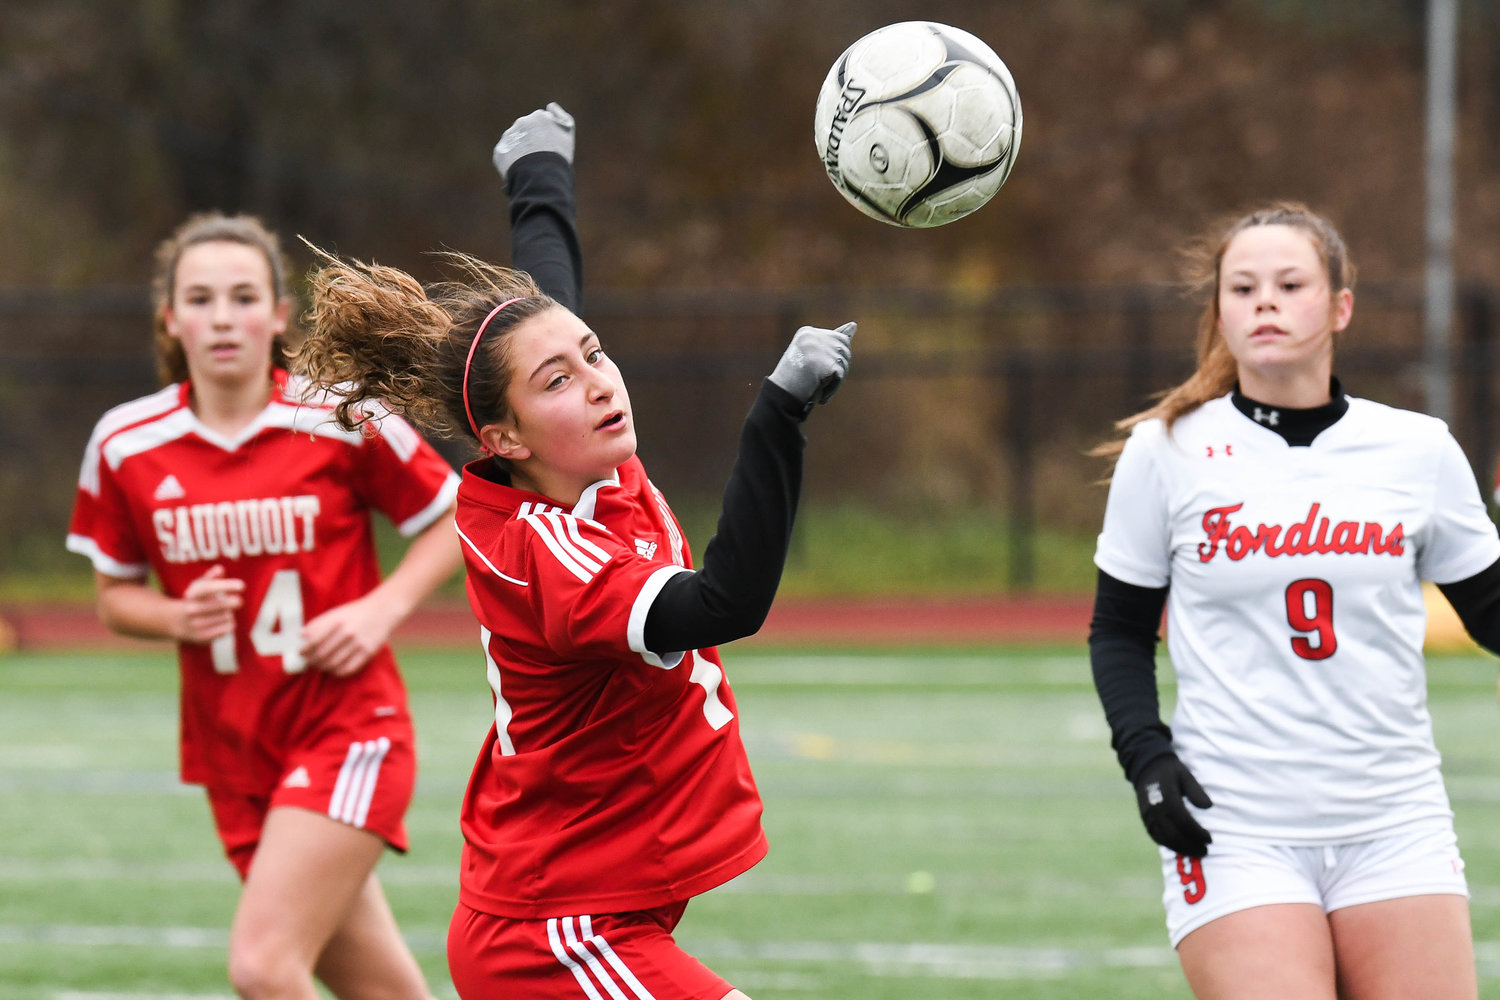 Sauquoit Valley forward Olivia Kalil, center, heads the ball during the Class C state final against Waterford-Halfmoon on Sunday at Cortland High School. Sauquoit lost 6-3.